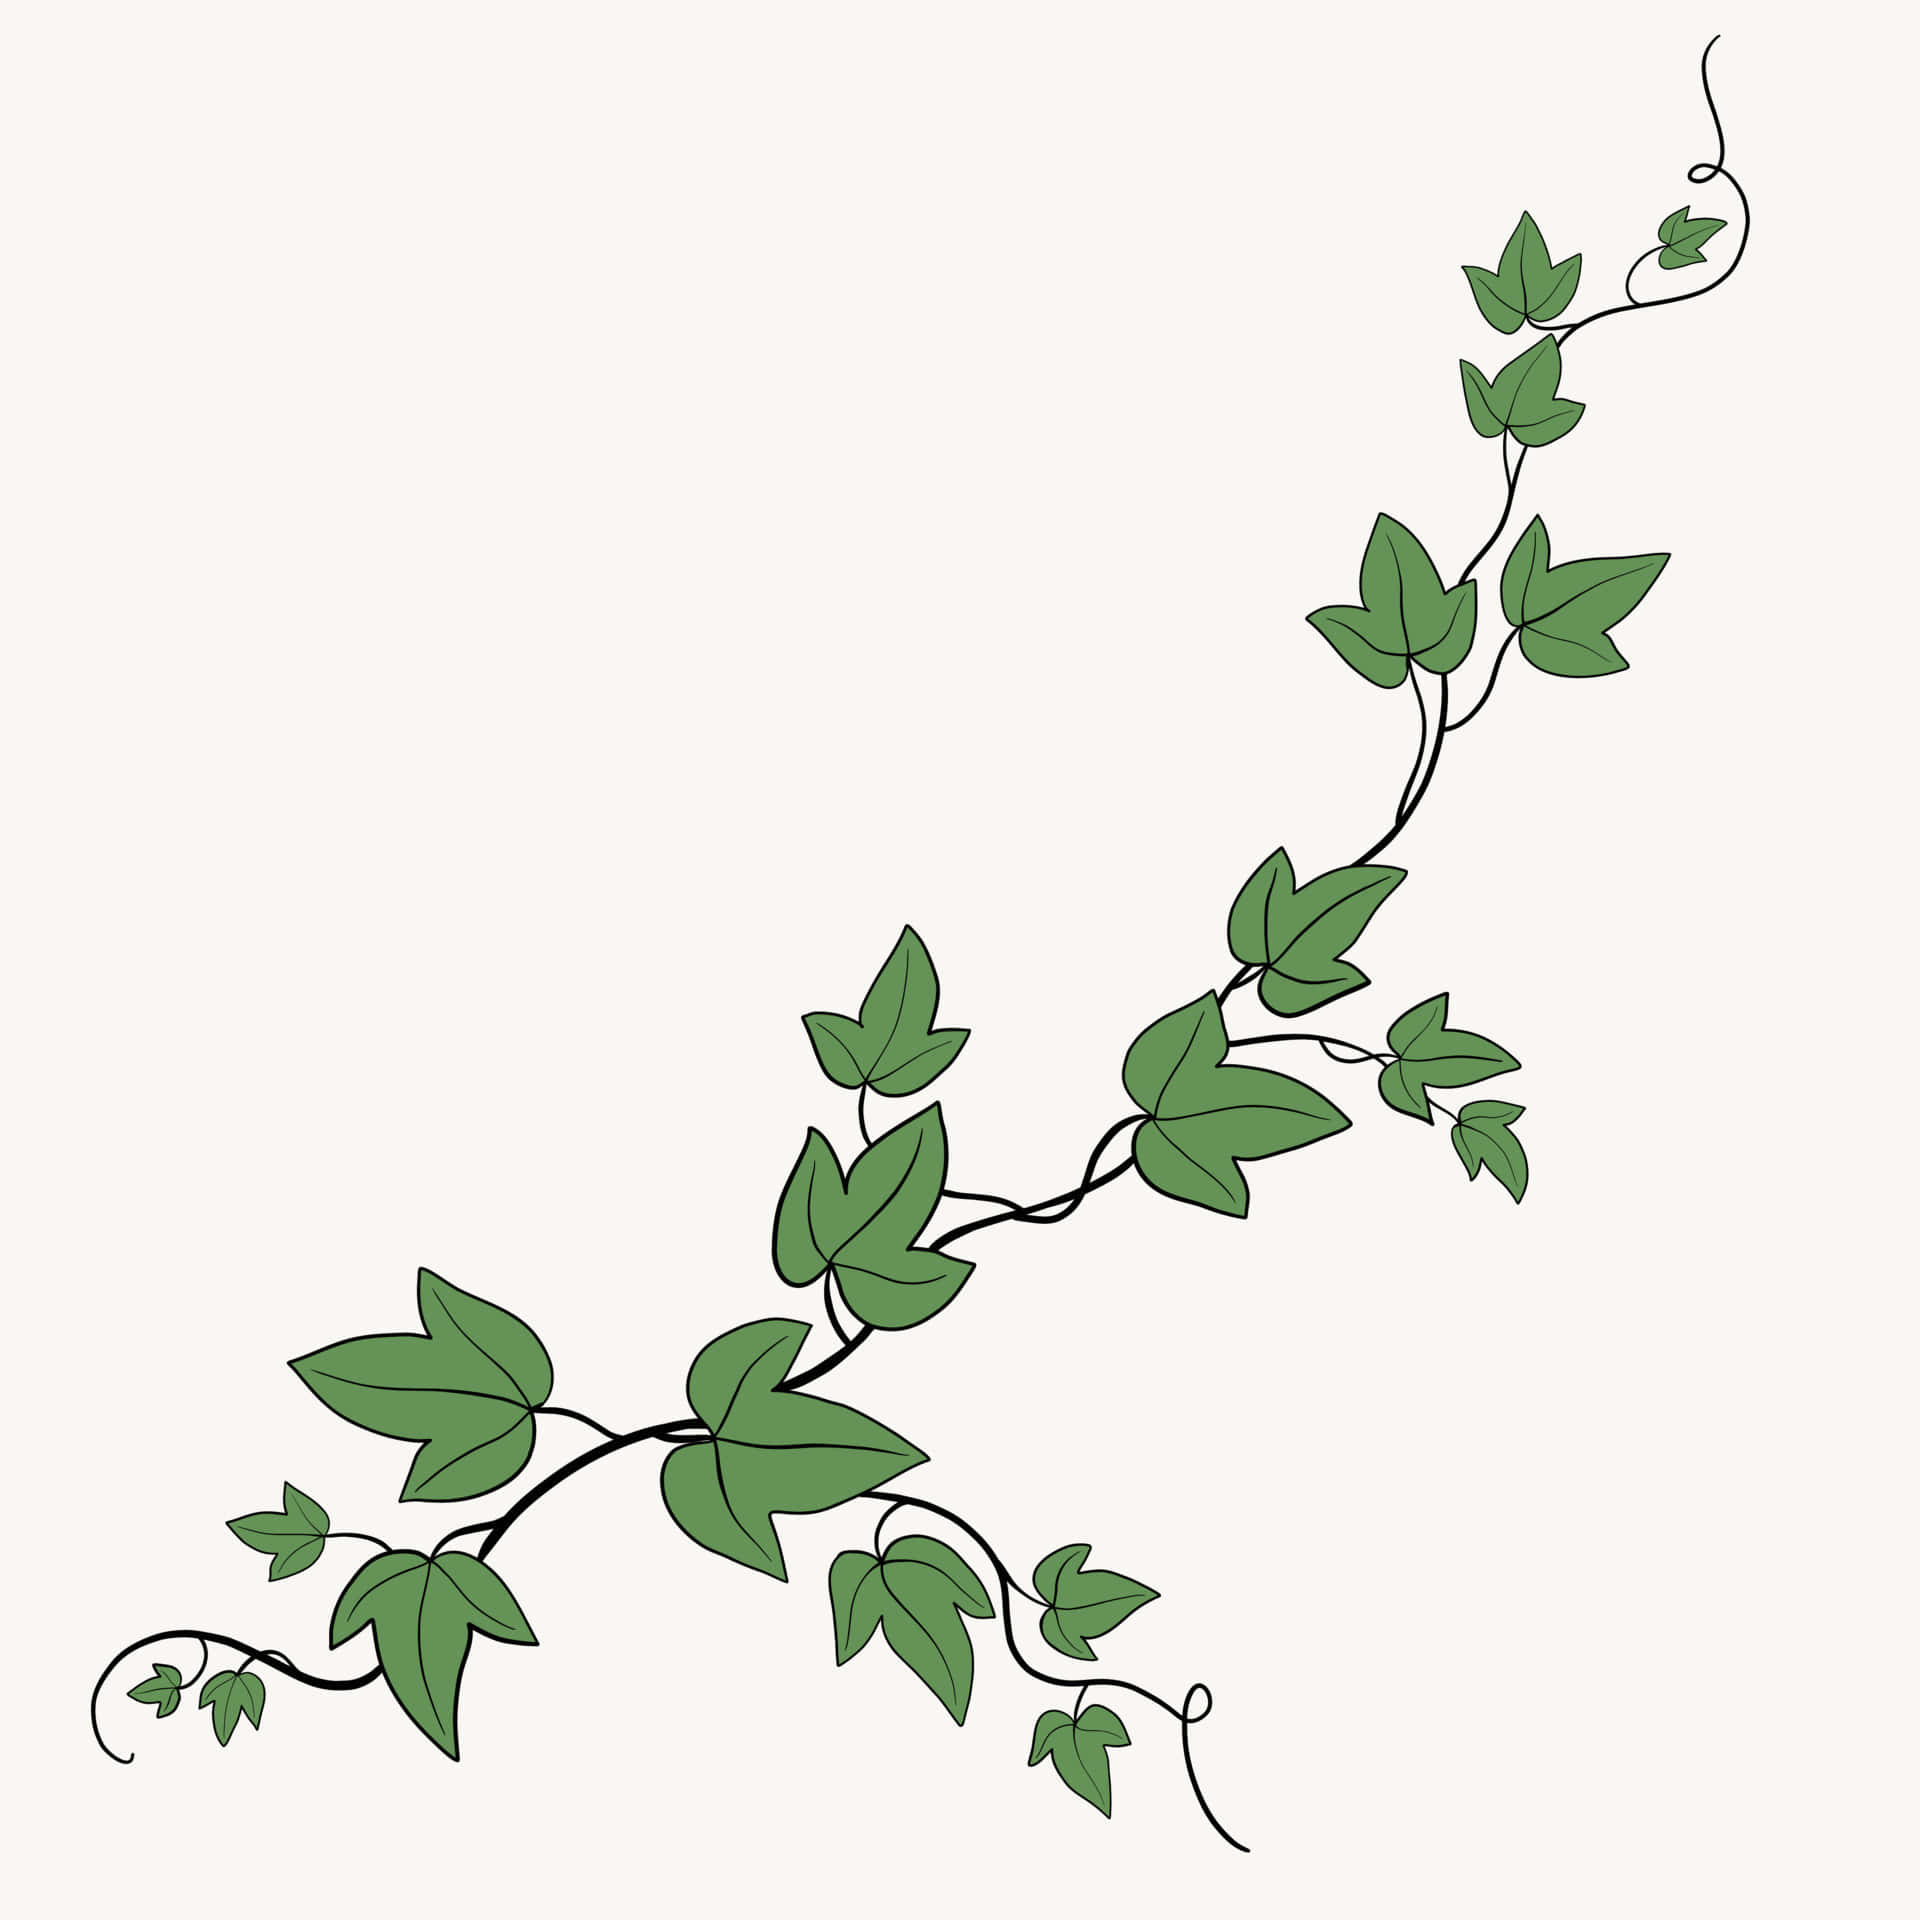 A Green Vine With Leaves On A White Background